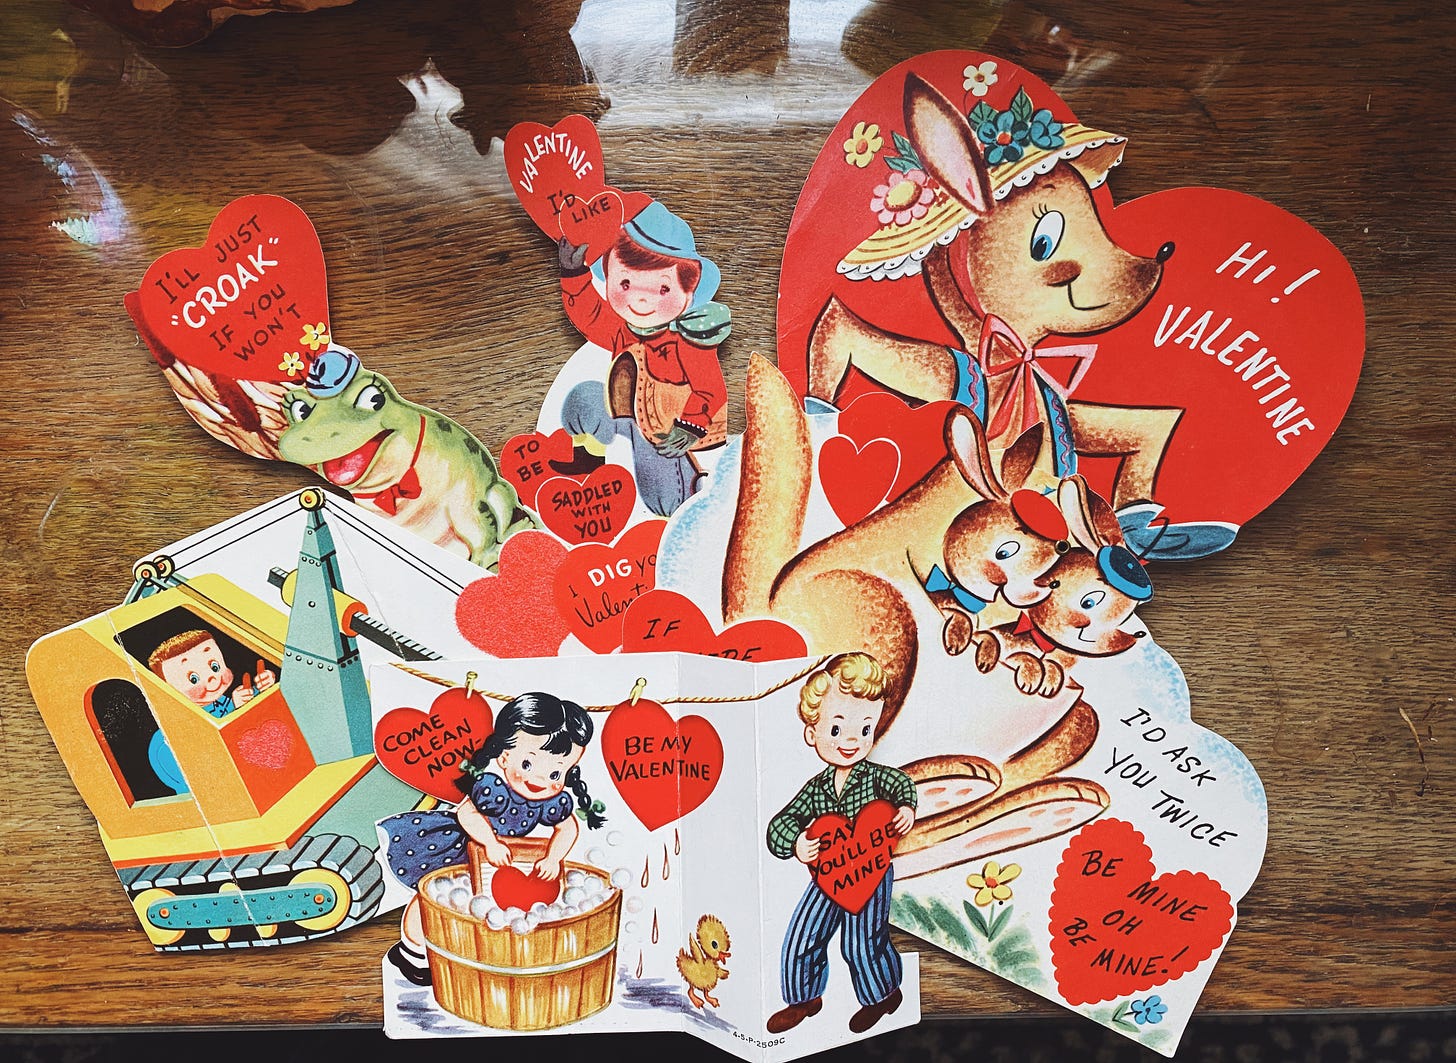 A collection of various retro Valentine Cards with cheesy greetings.